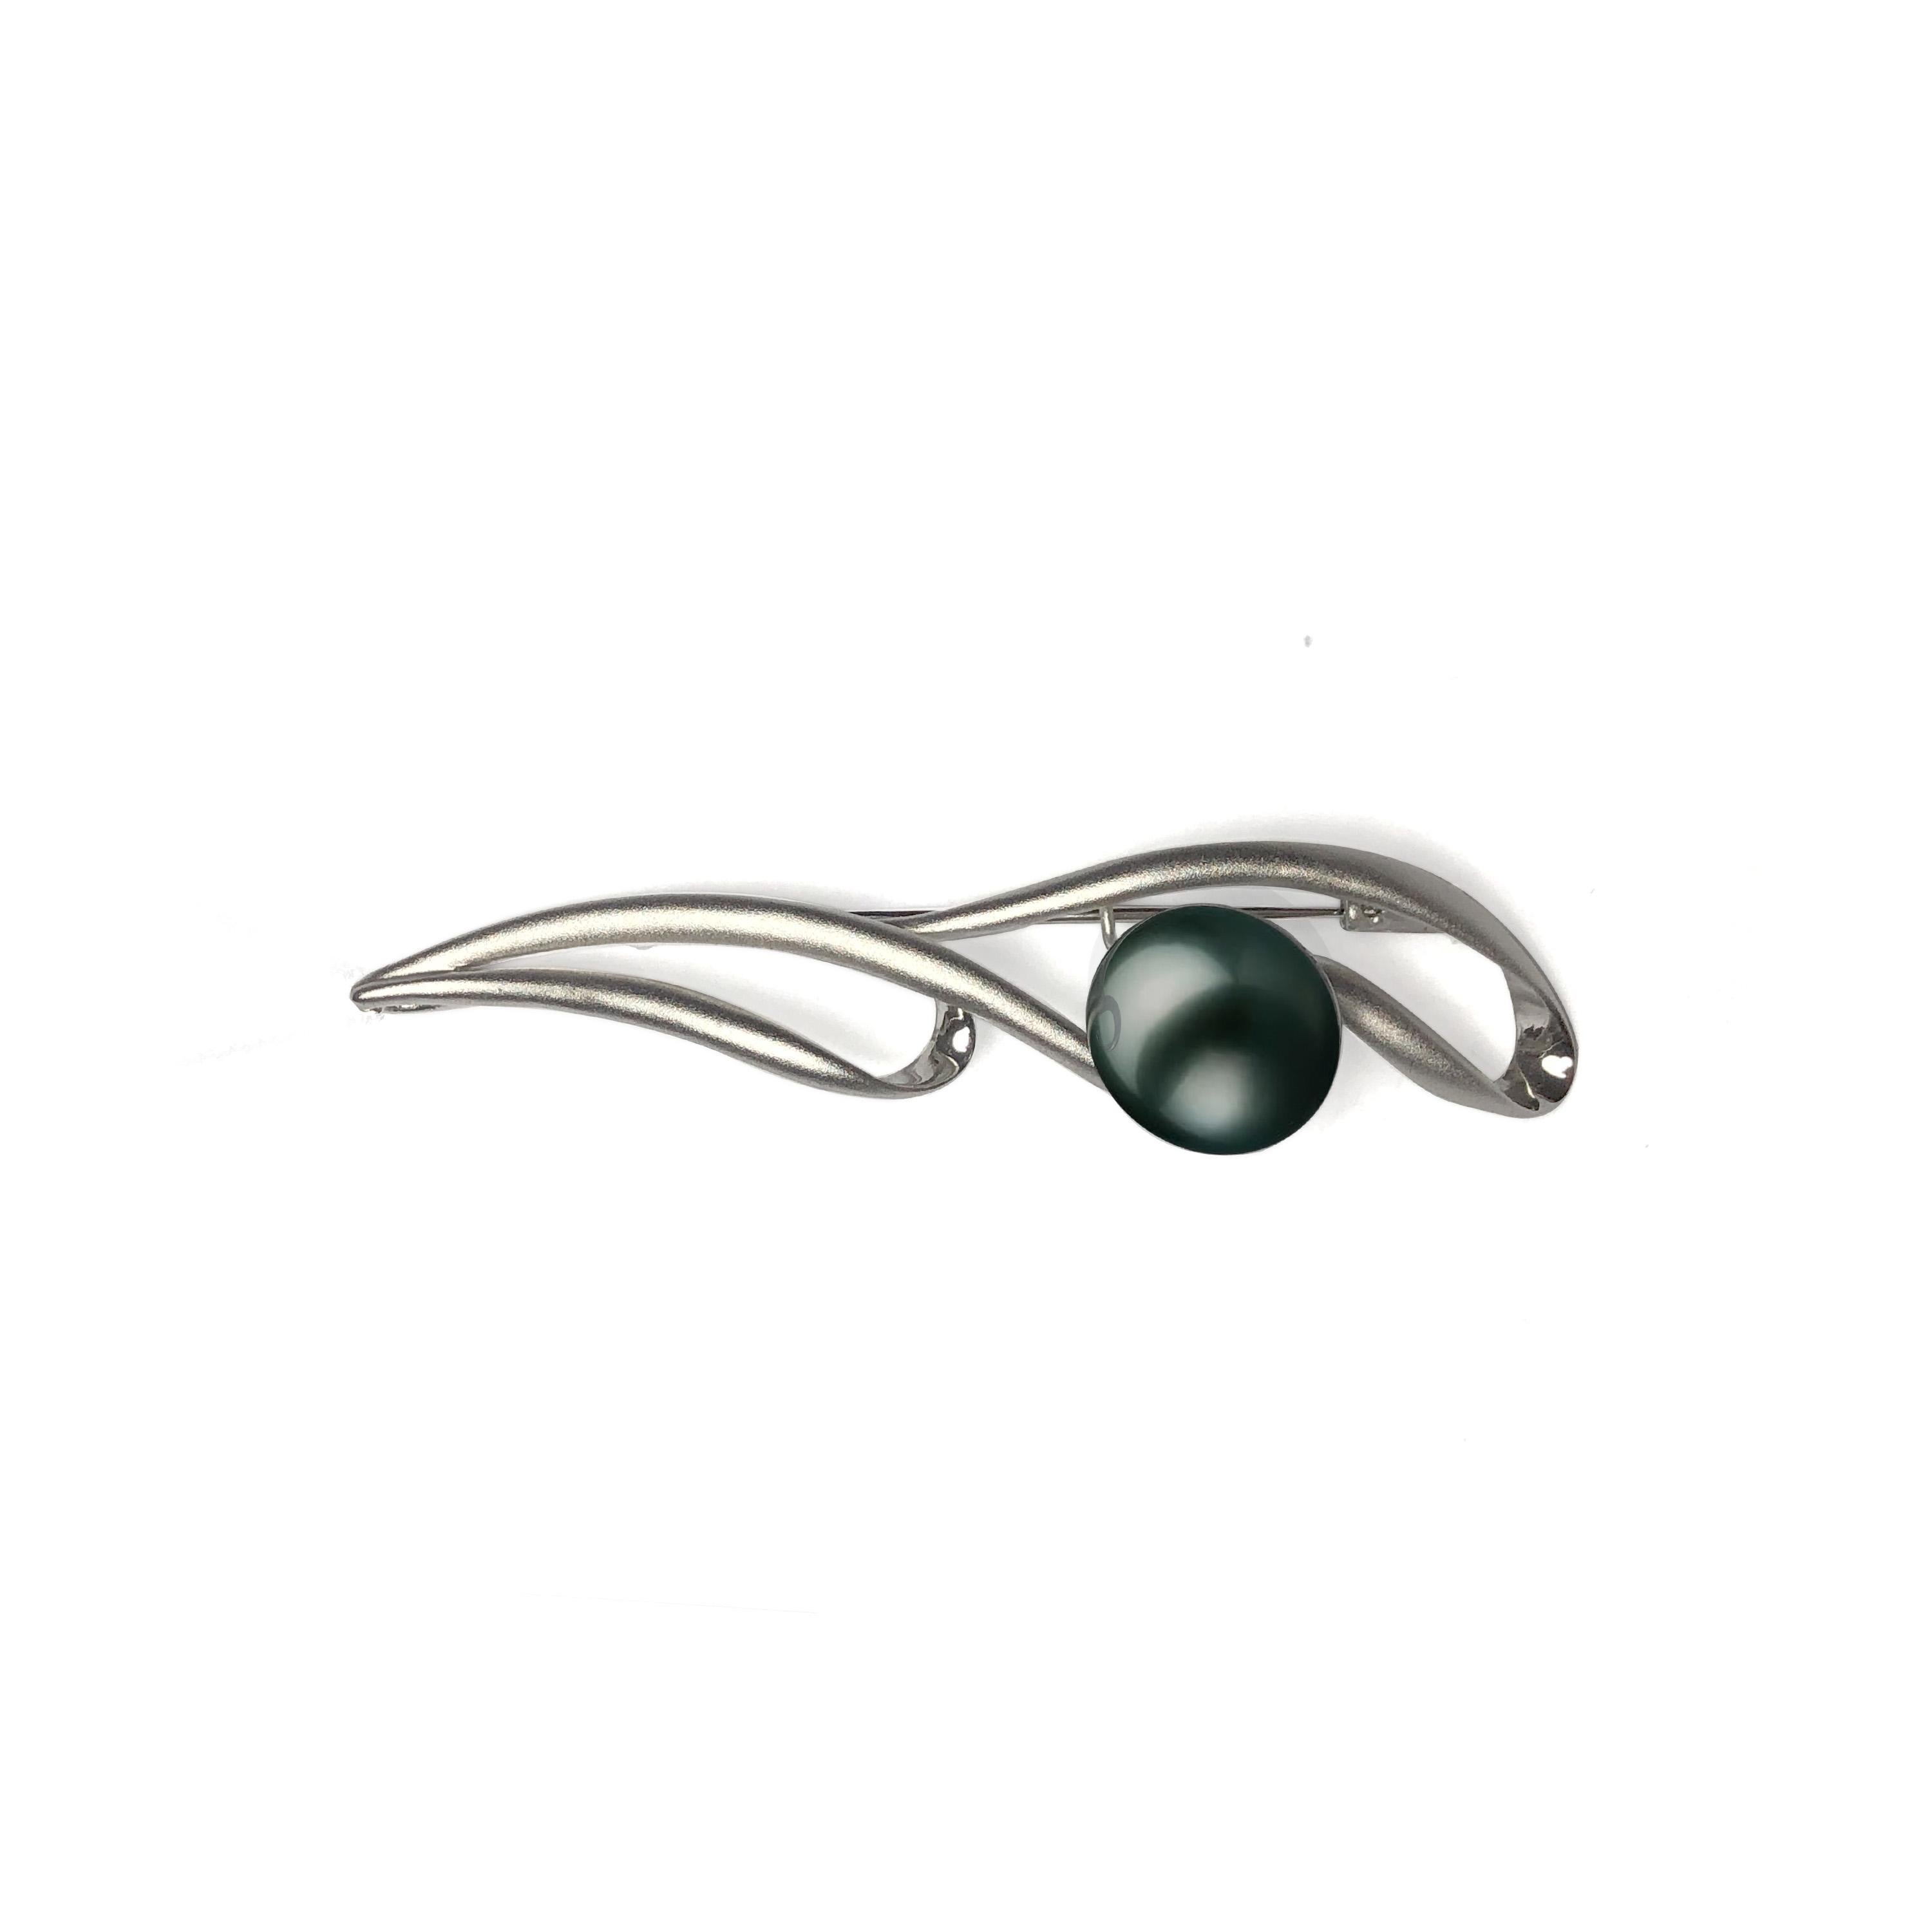 A versatile design with an East meets West fusion. The traditional black pearl rests assuredly atop the gentle waves of satin-textured sterling silver.

A vintage style brooch with a modern twist. Easily style to suit your occasion. The 16